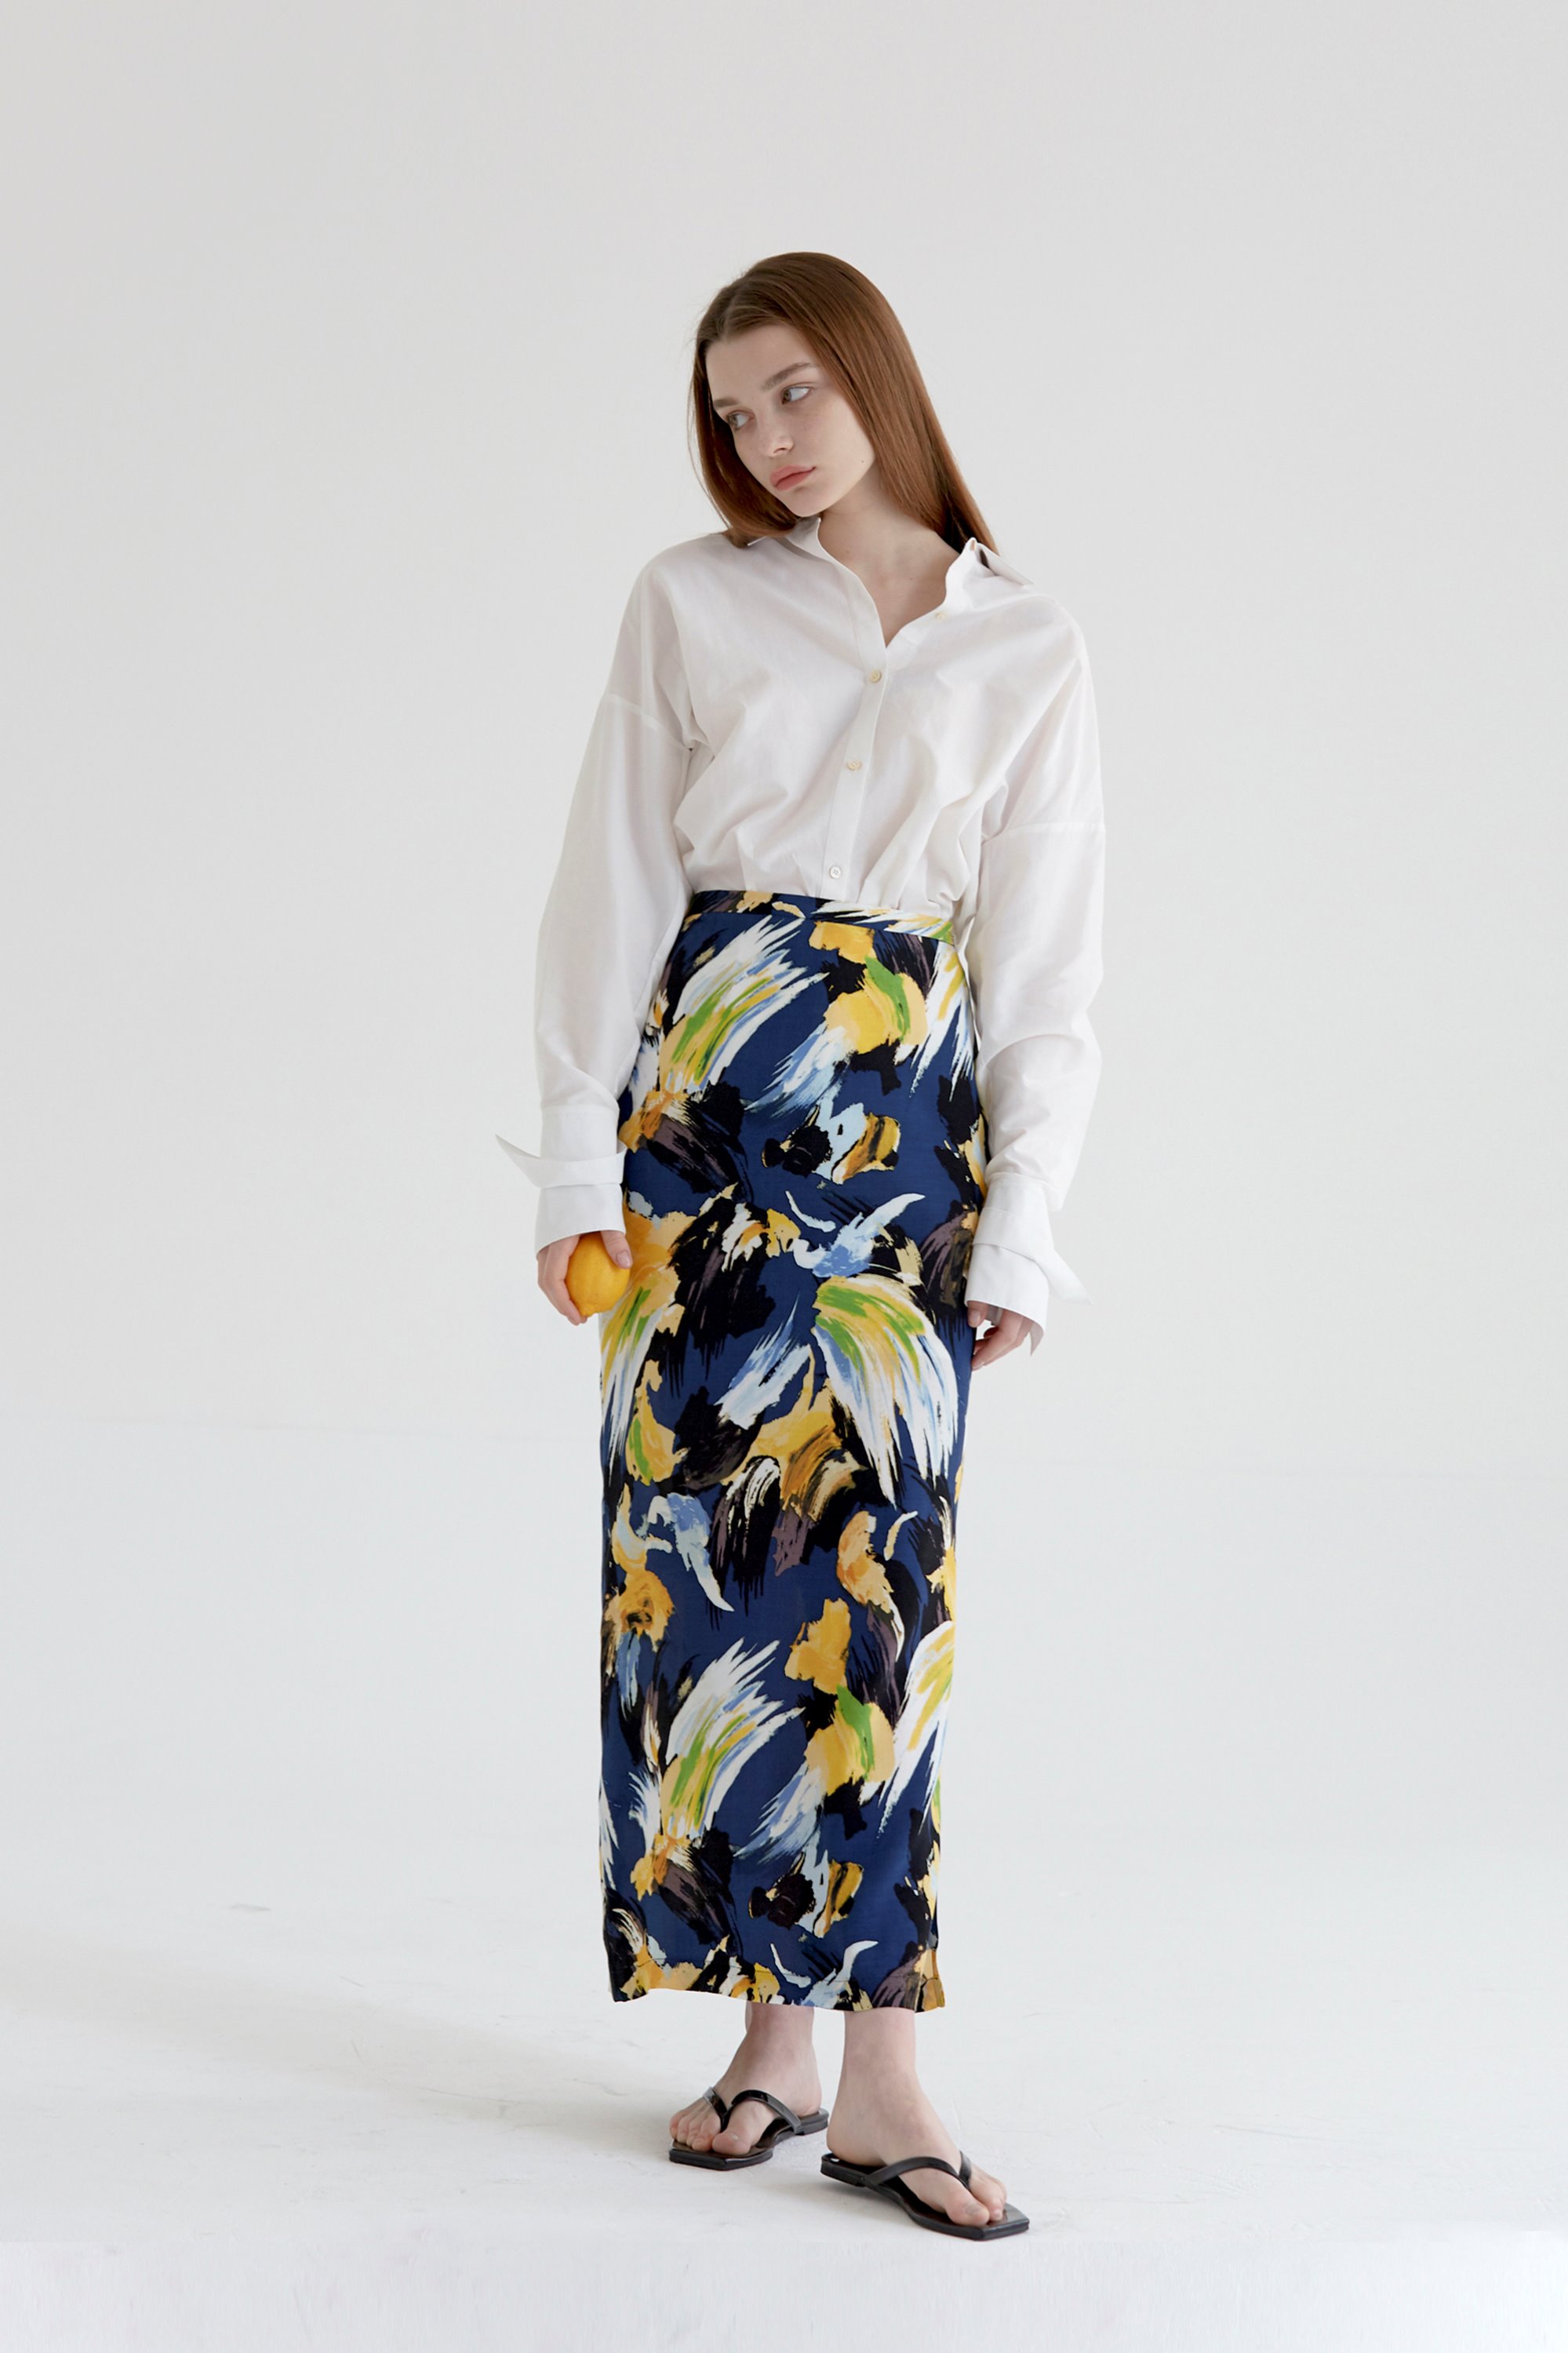 ANTHÈSE fall in pattern skirt, navy